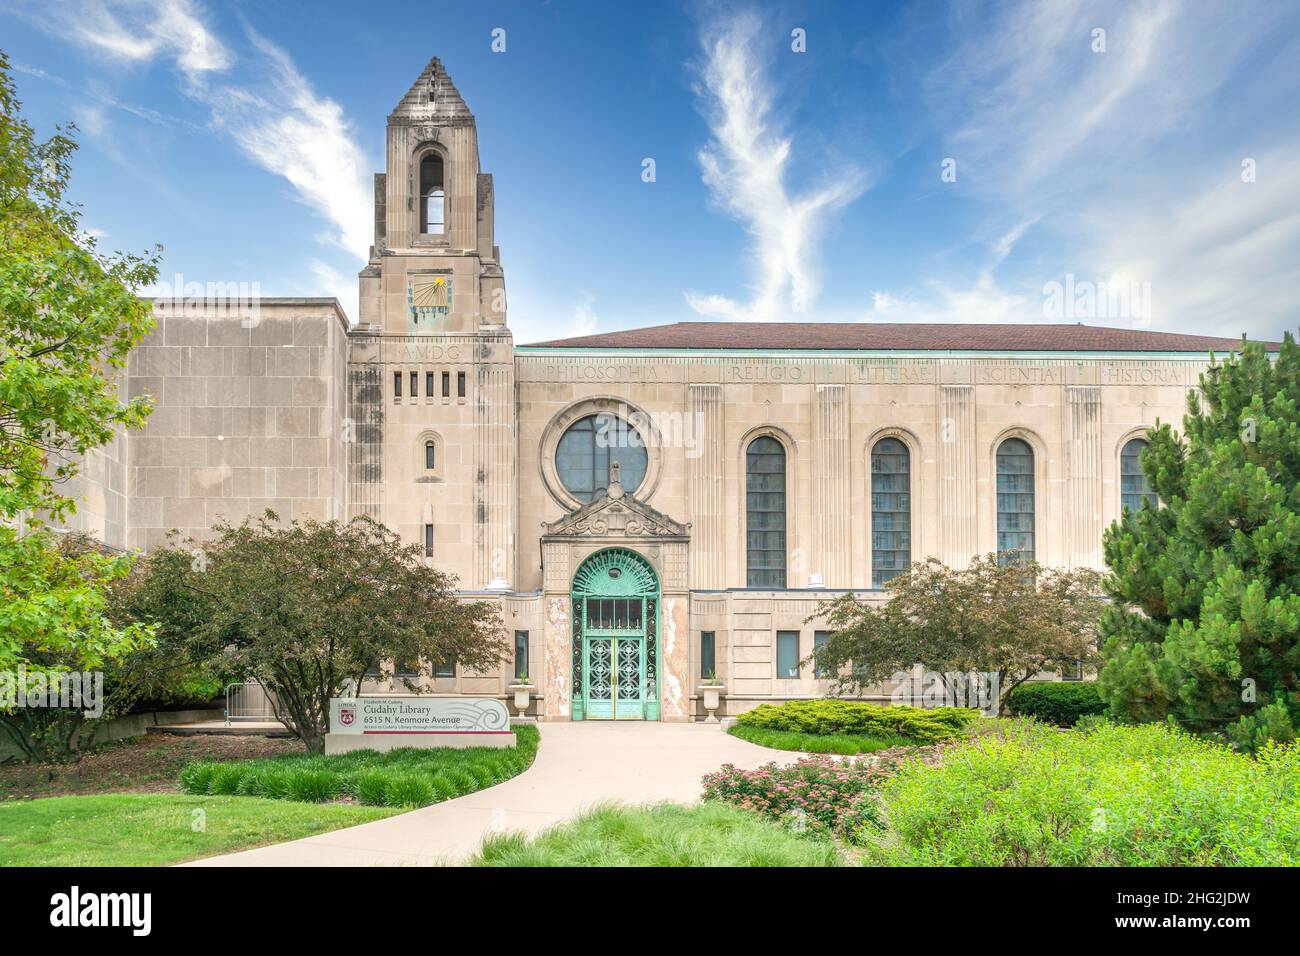 CHICAGO, IL, USA - JUNE 21, 2021: Cudahy Library on the campus of Loyola University Chicago. Stock Photo